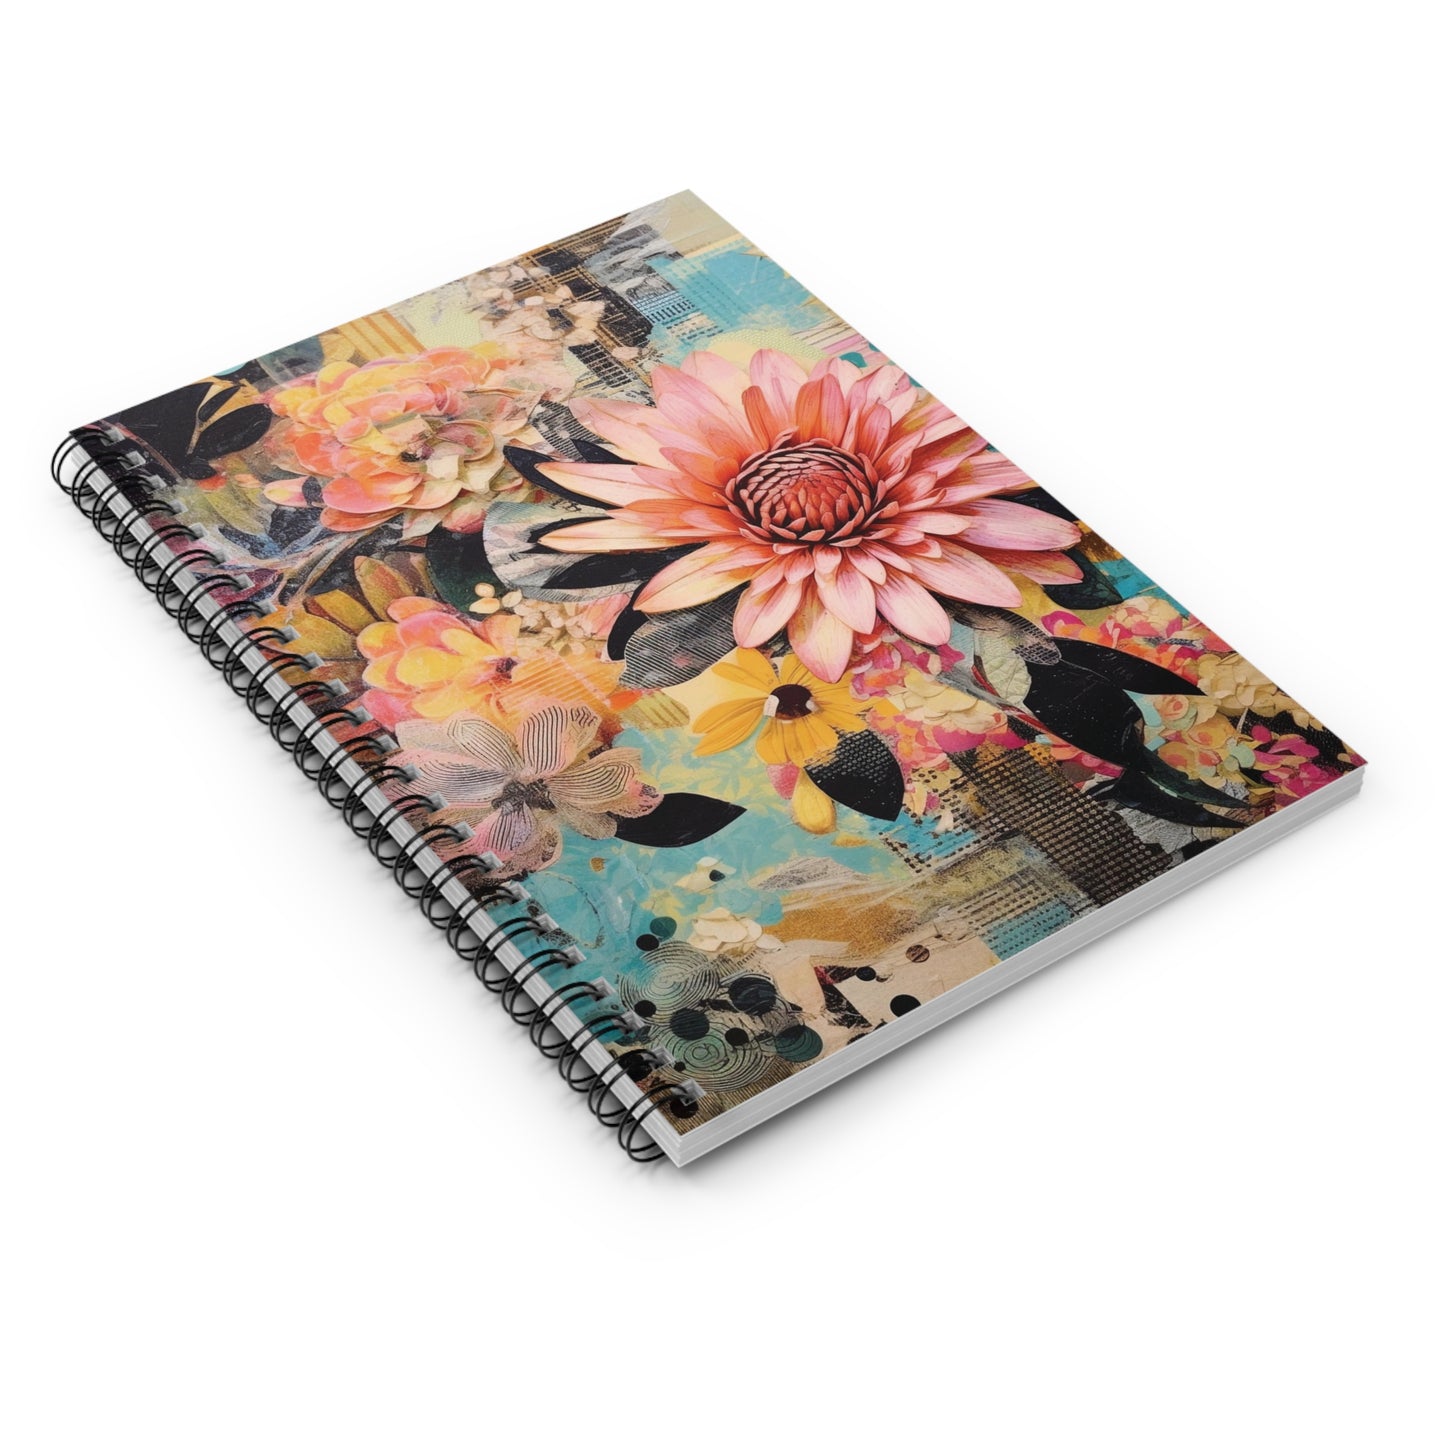 Floral Collage Art Notebook (2) - Composition Notebook, Spiral Notebook, Journal for Writing and Note-Taking